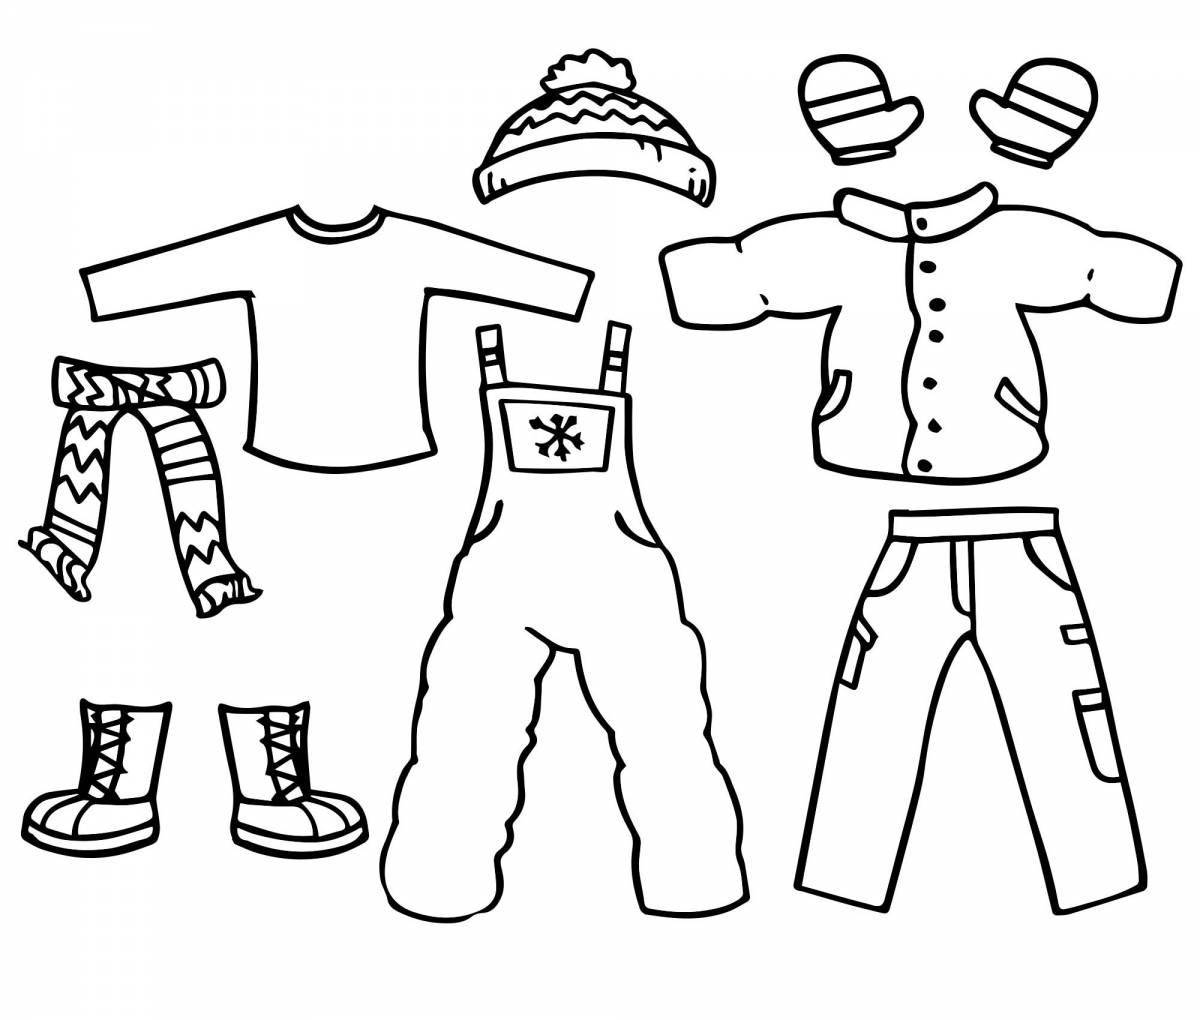 Coloring page adorable clothes and shoes